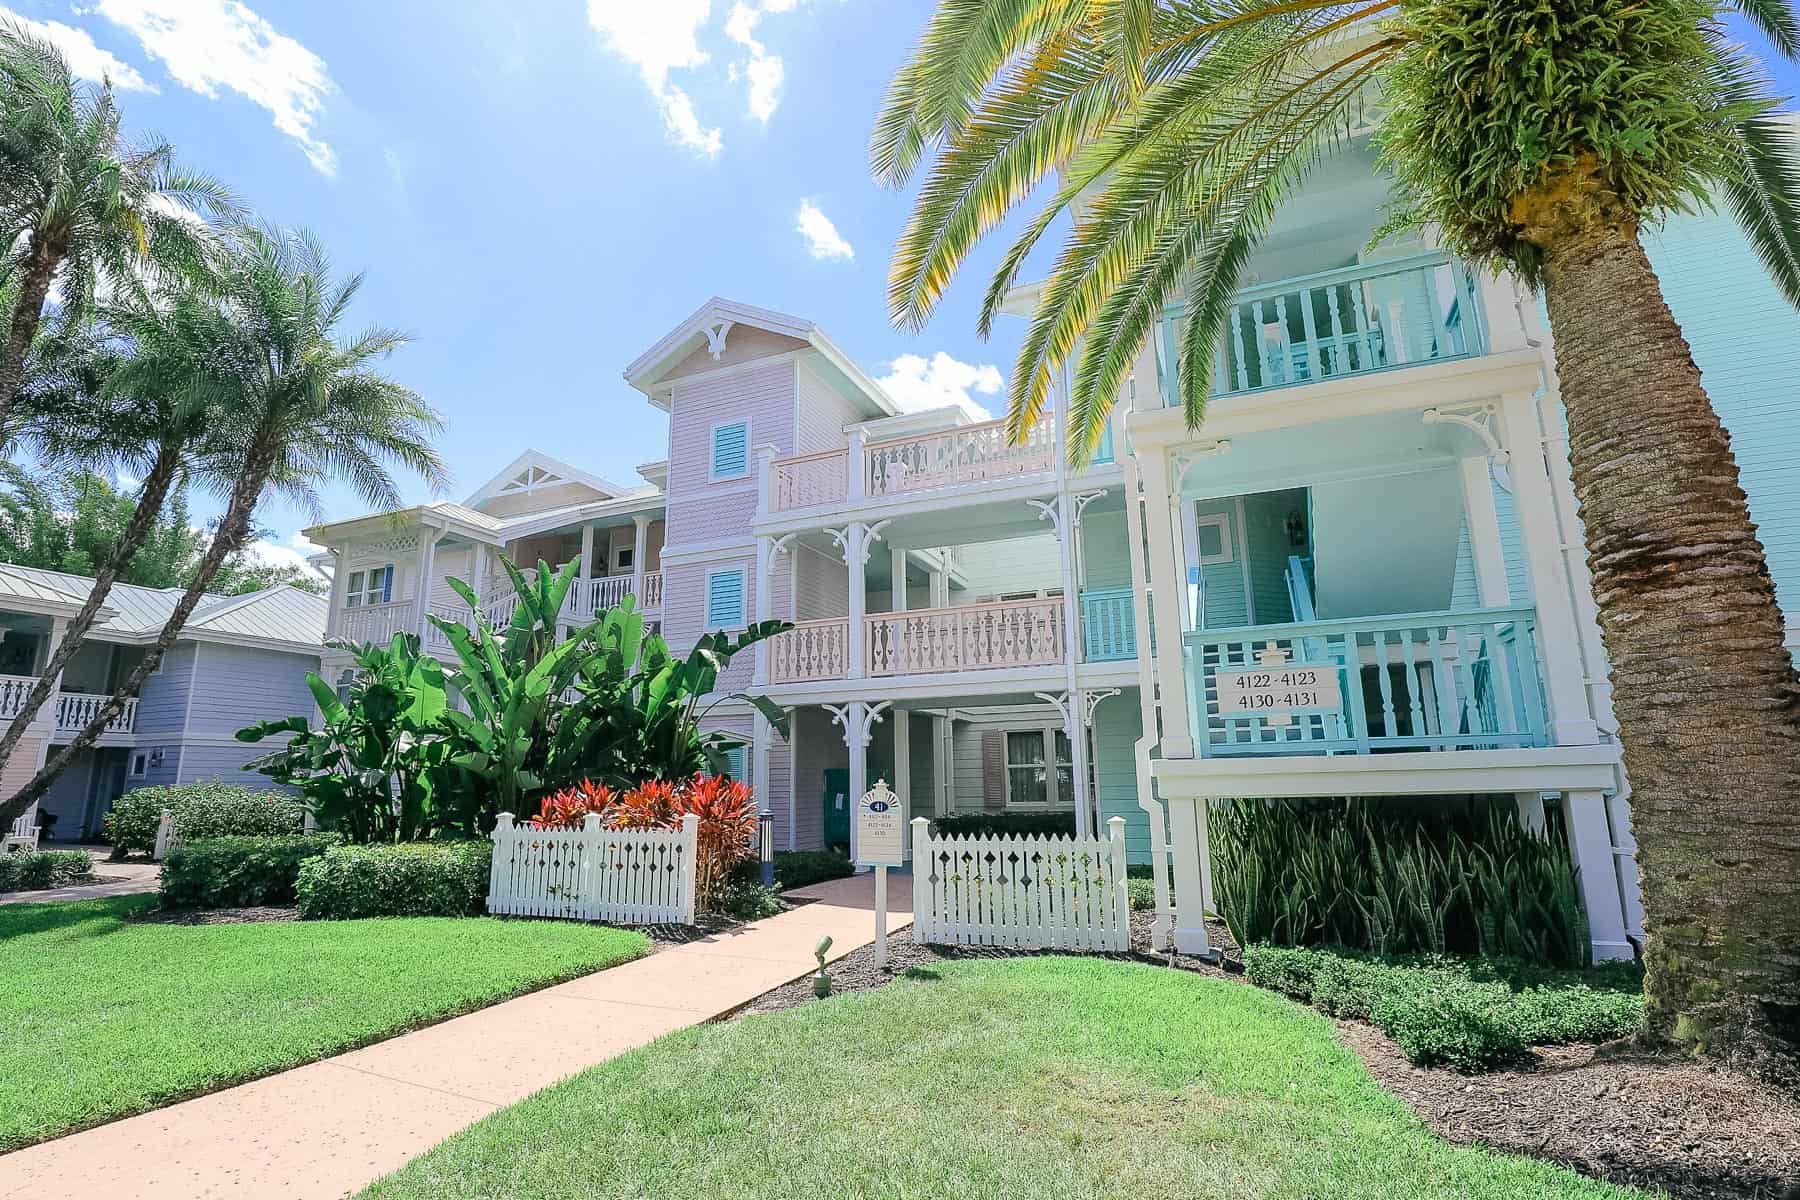 Old Key West exterior with staircases in pink and mint green colors. 